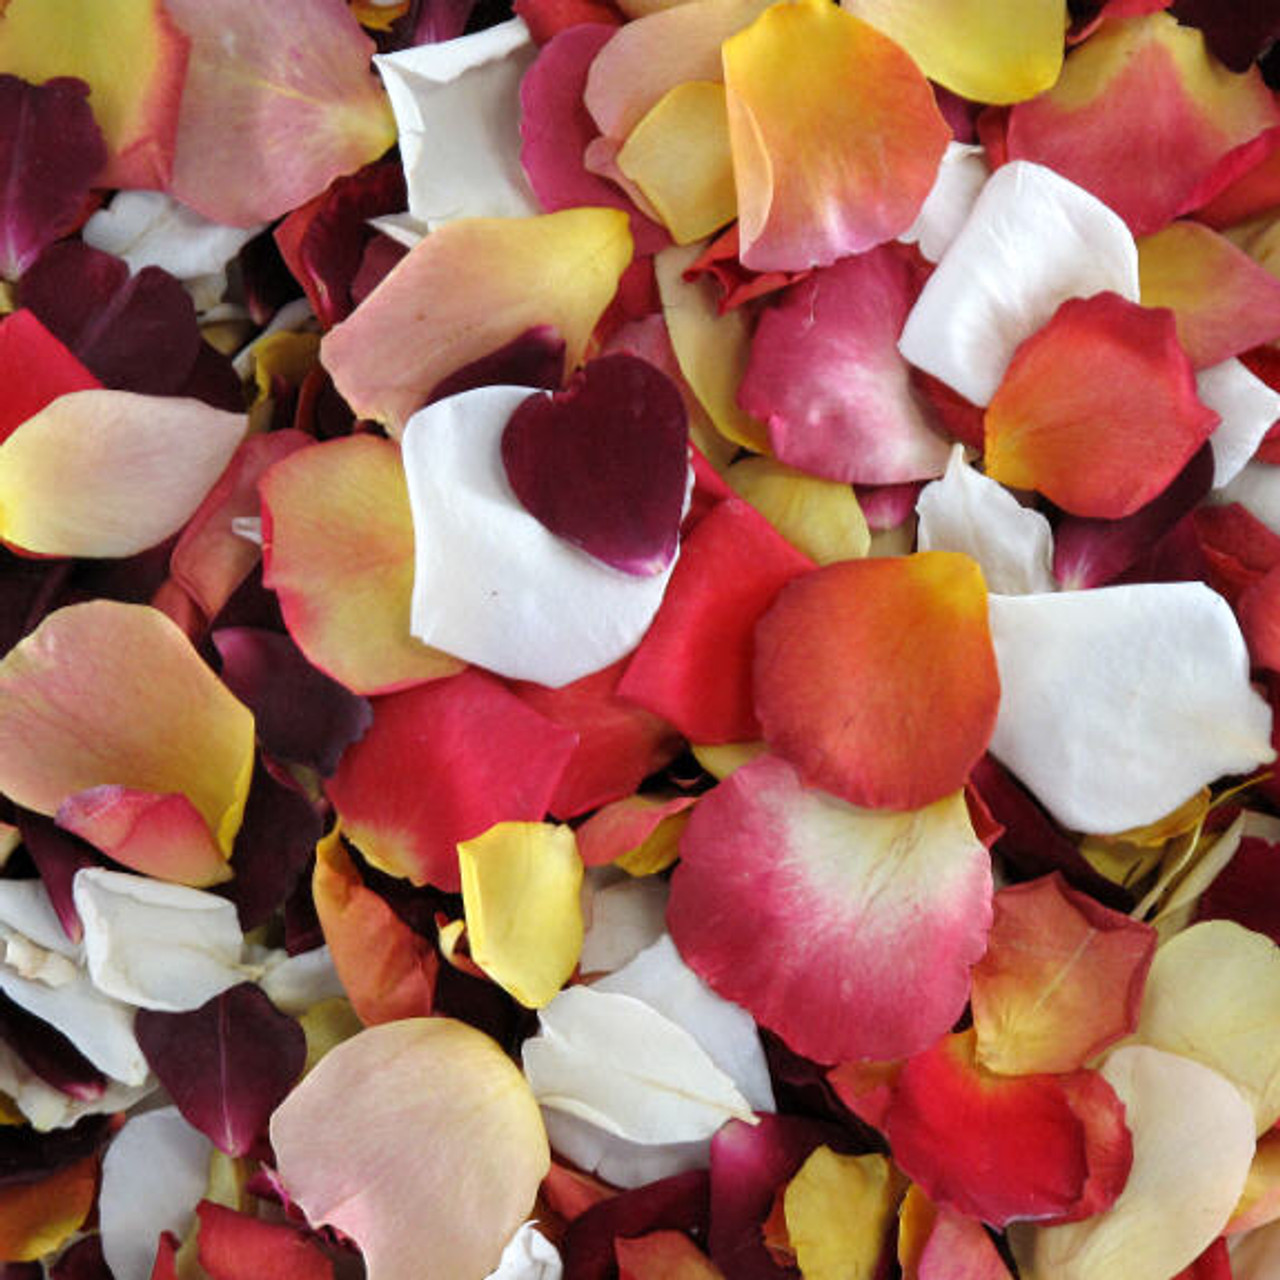 Rose petal decoration. Eco-friendly petals available at  www.flyboynaturals.com